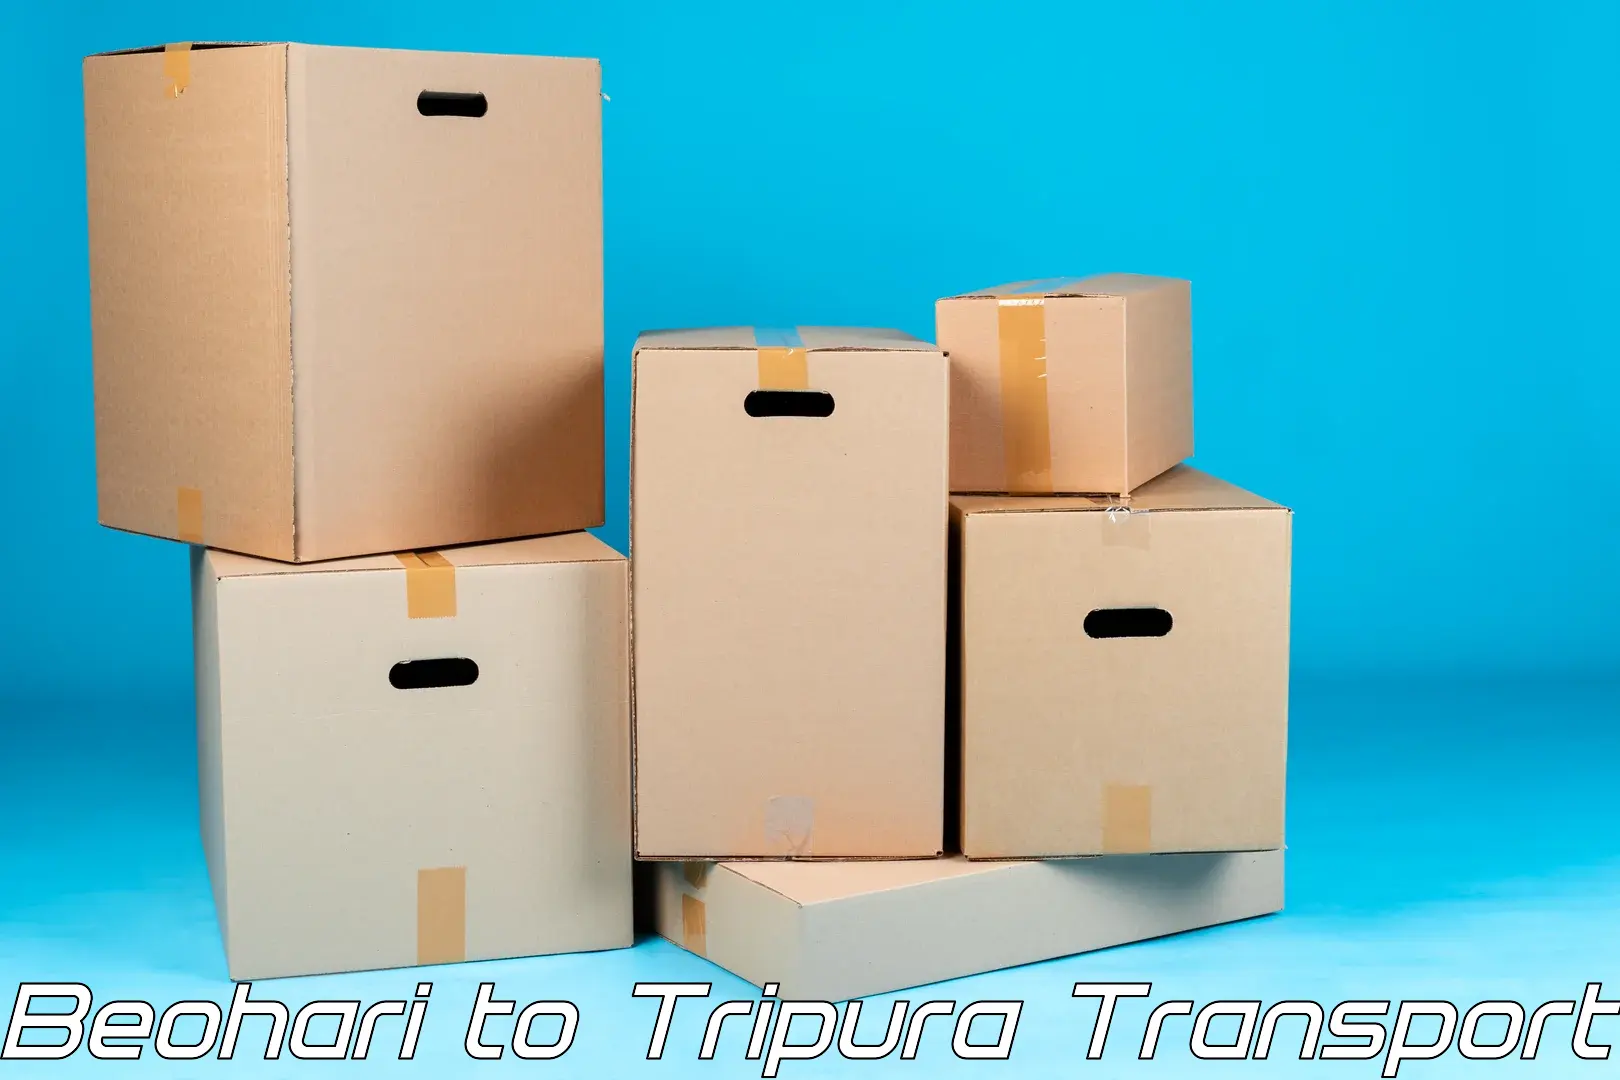 Shipping services Beohari to Udaipur Tripura